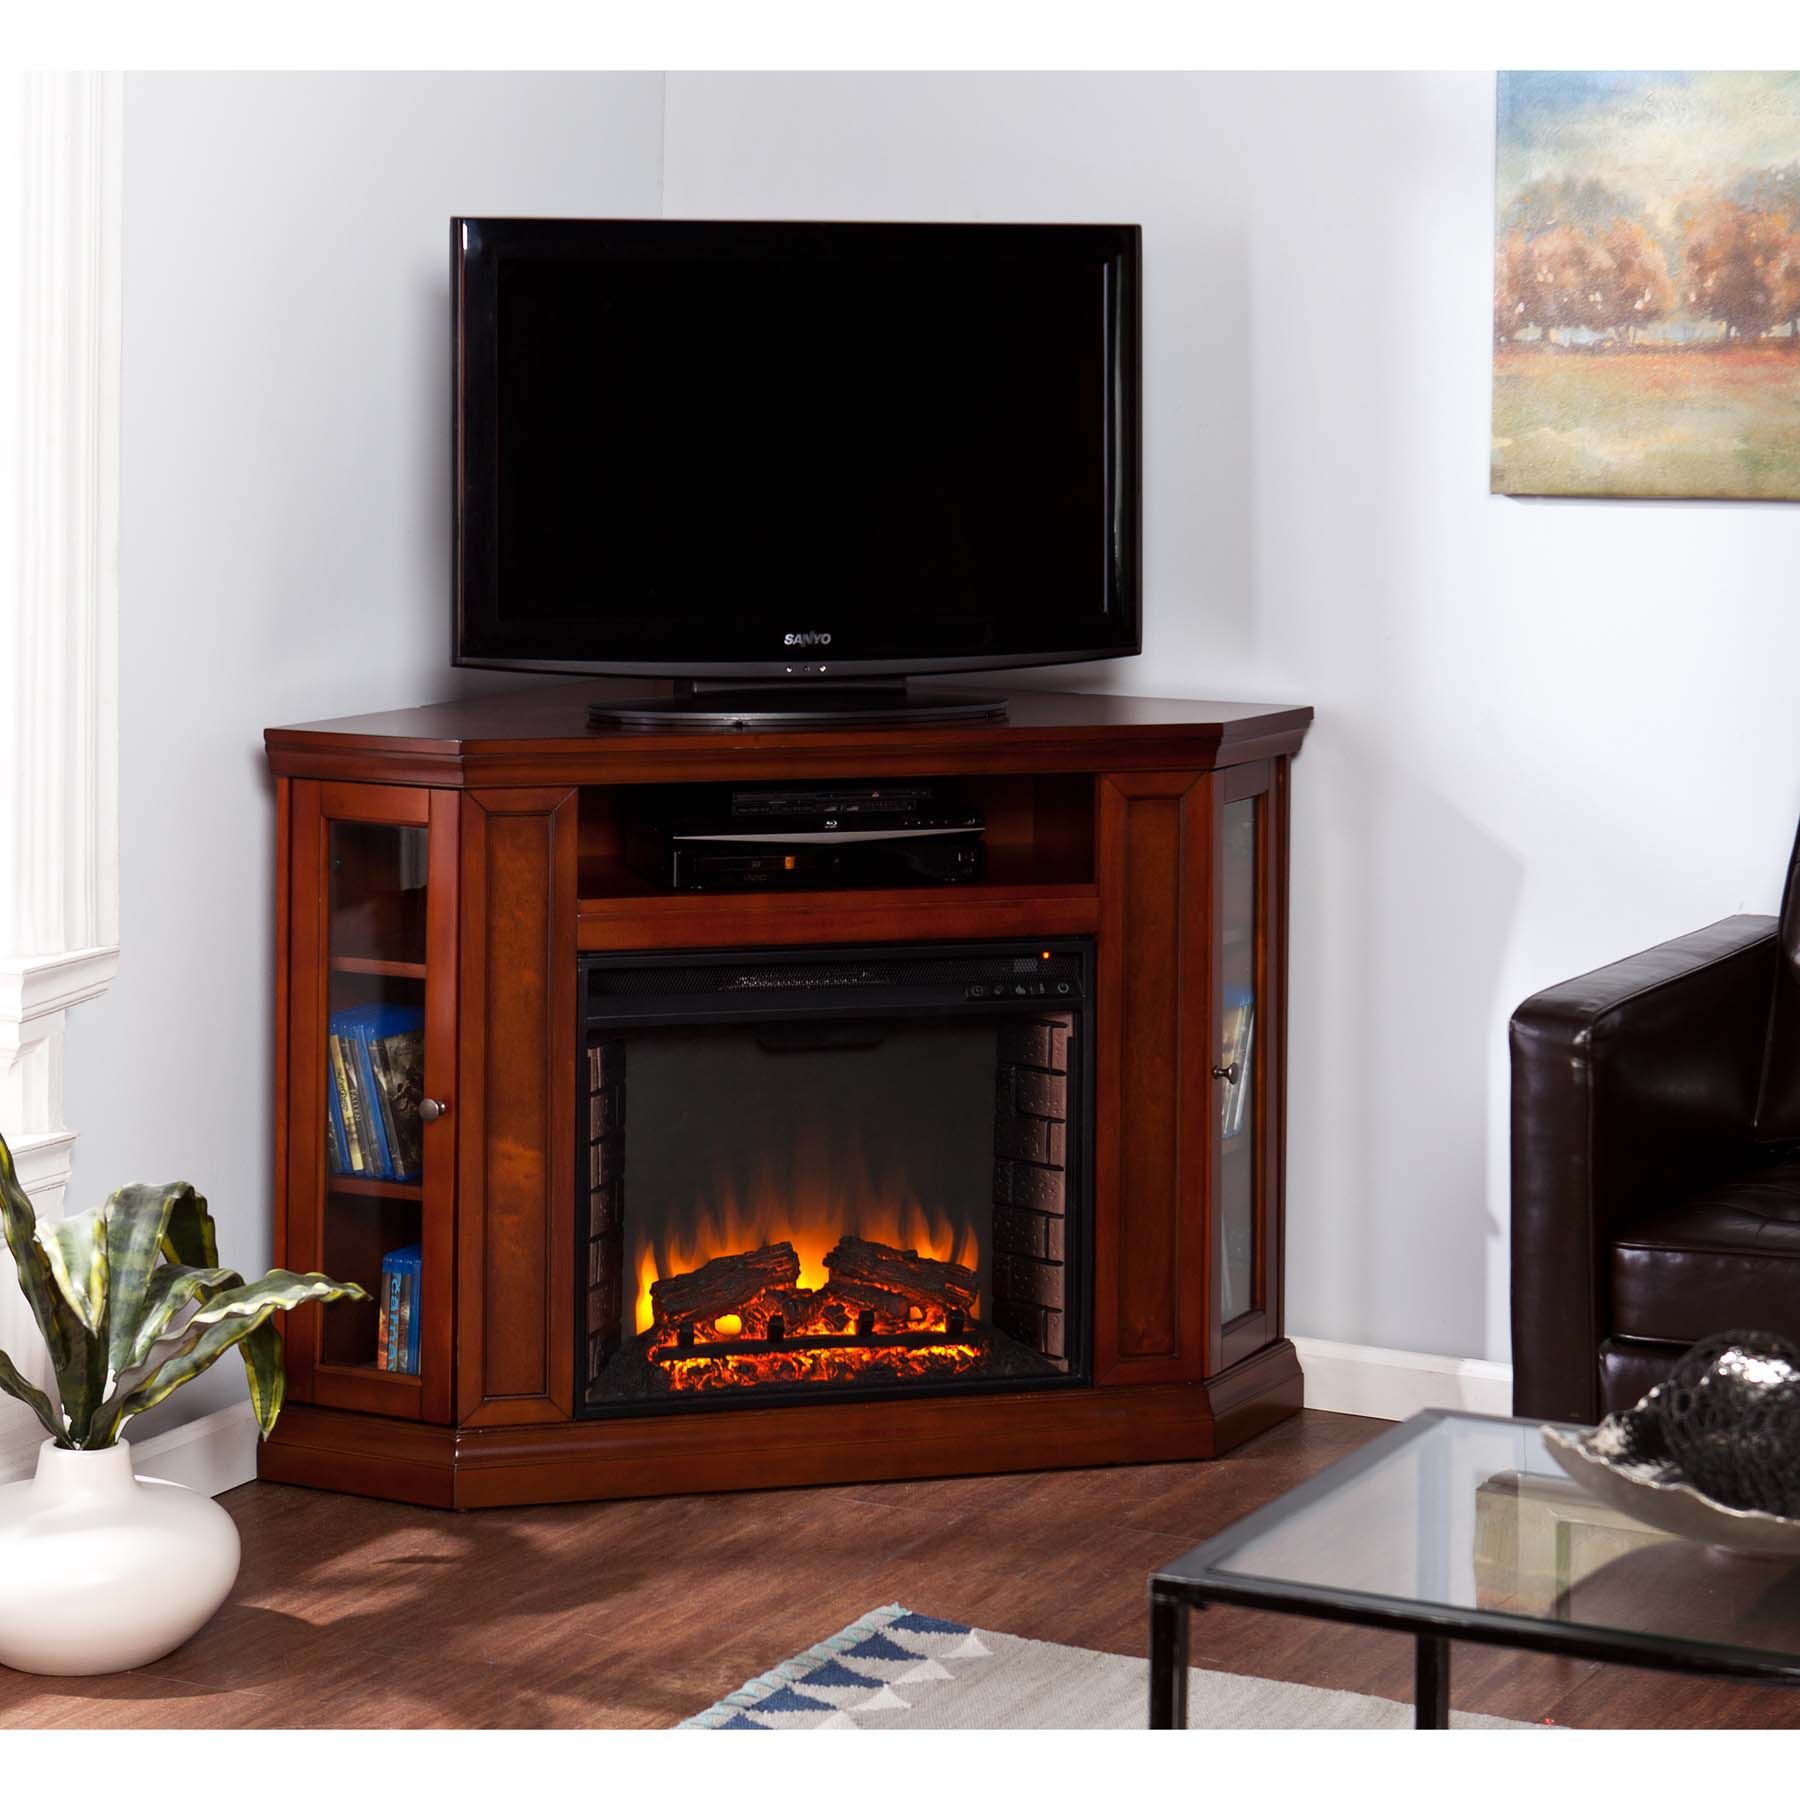 Fake Fireplace Insert Awesome Elegantly Crafted Rustic Electric Fireplaces